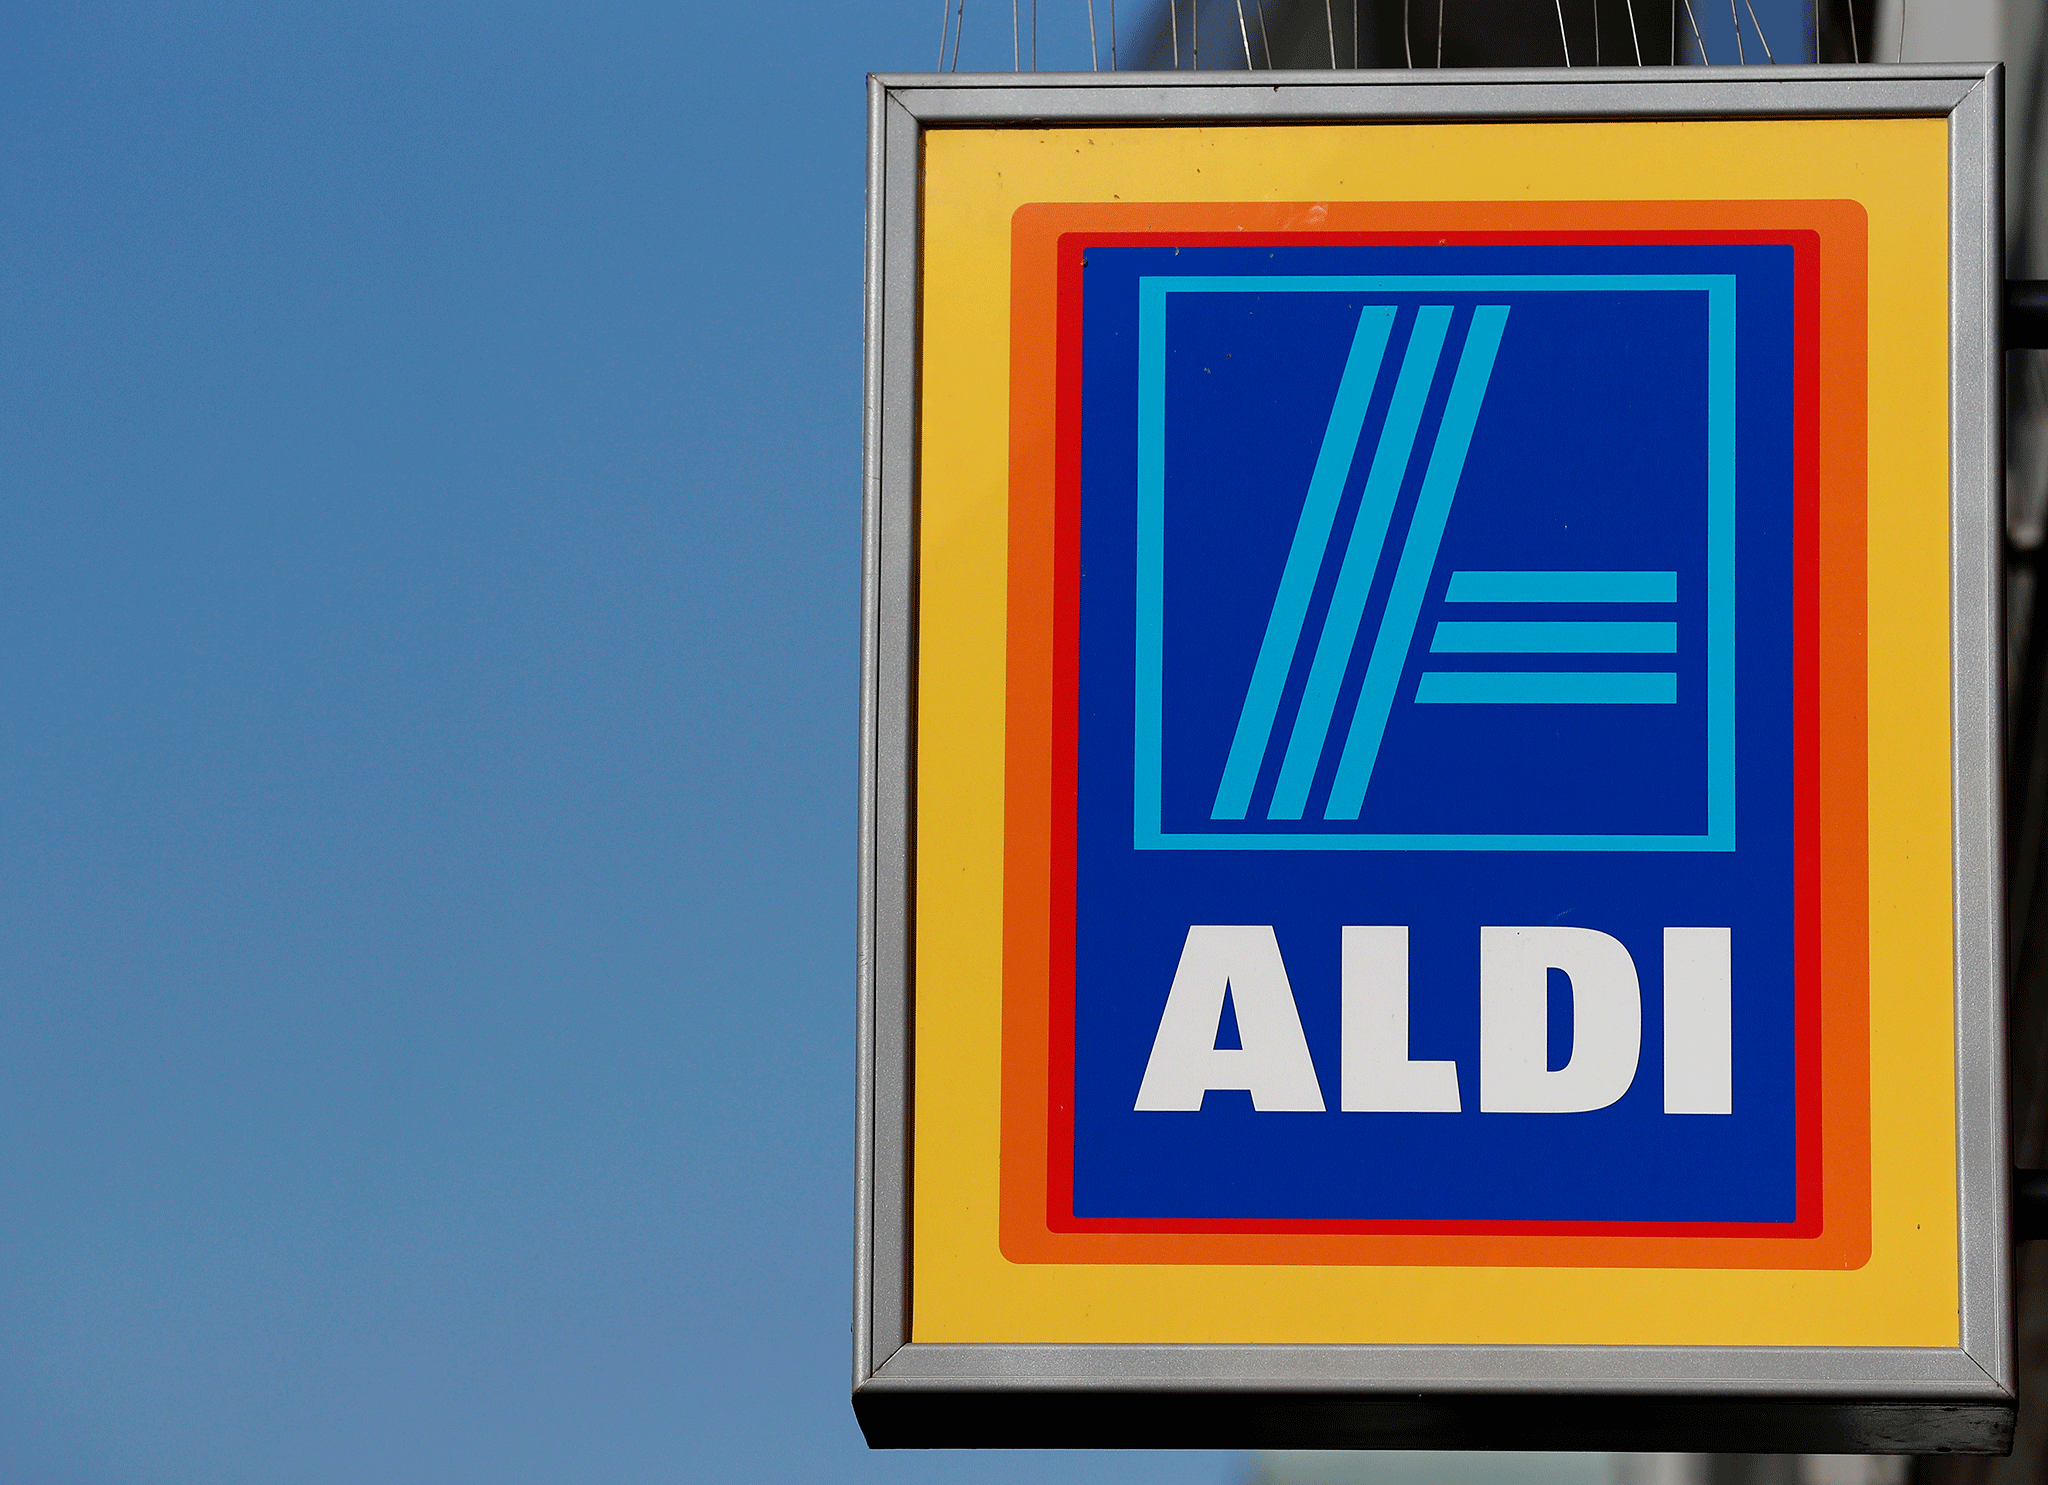 Aldi was founded more than a century ago when Anna Albrecht opened a small store in Essen, Germany